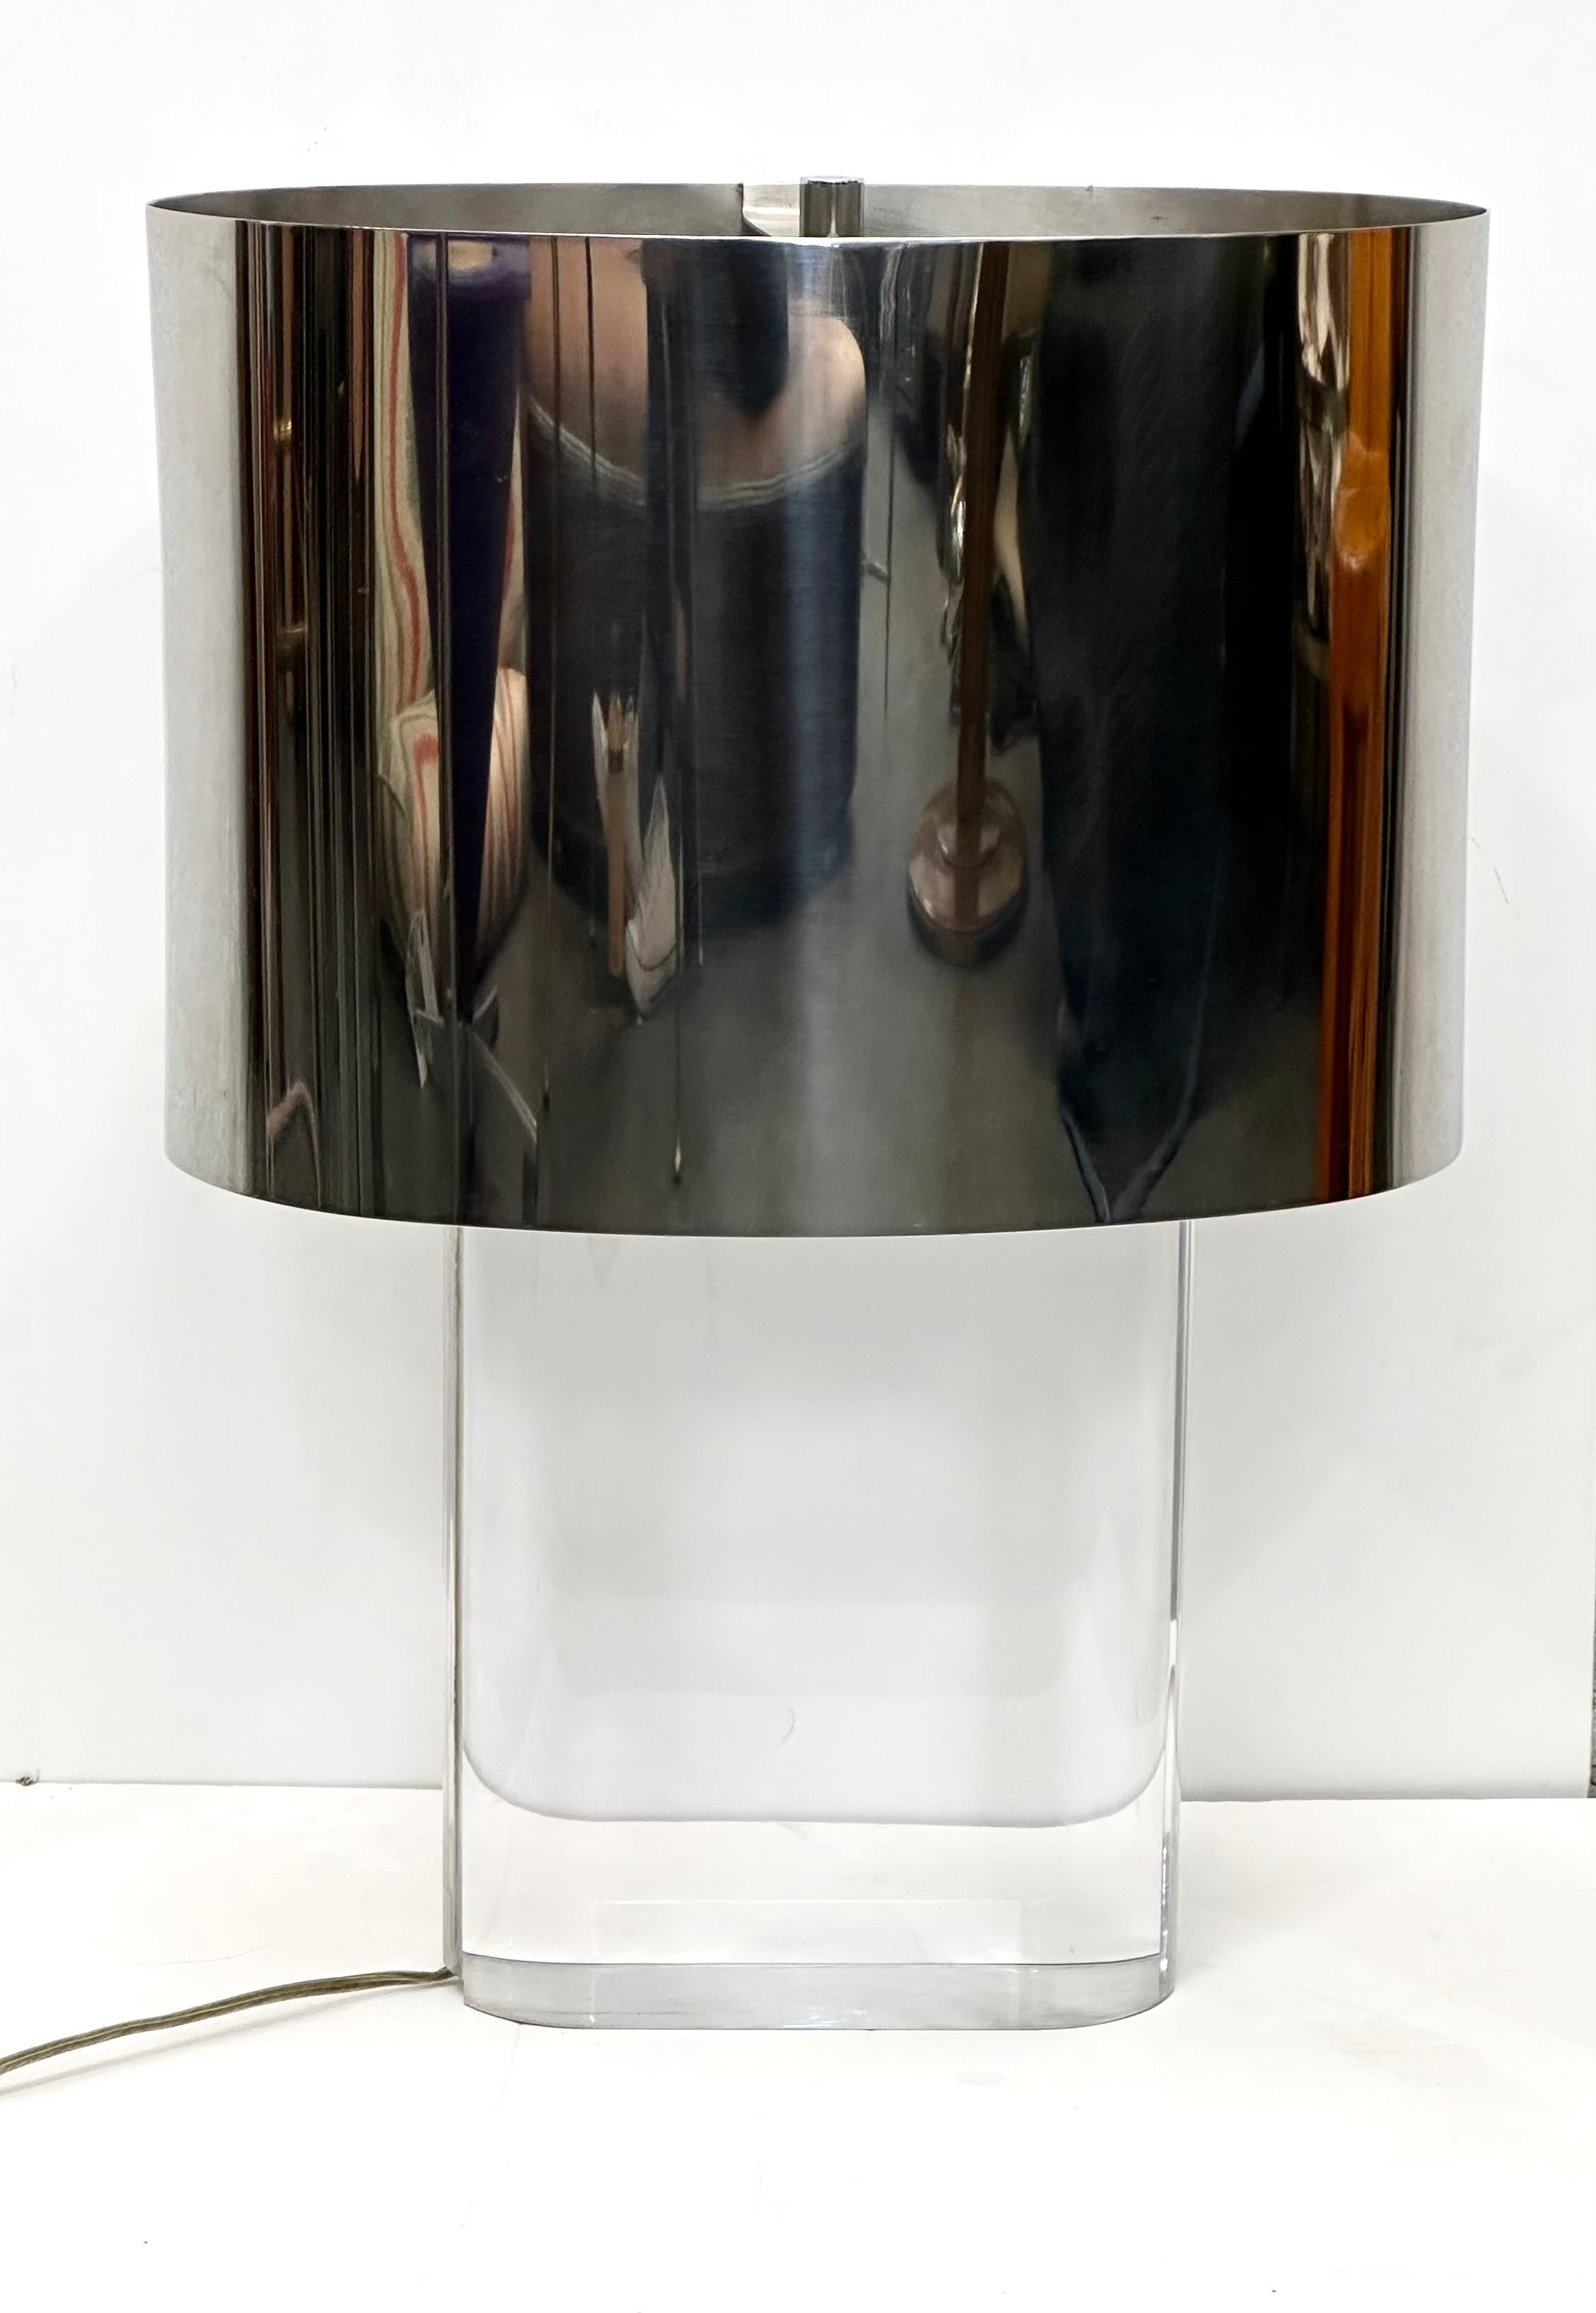 Rare solid clear acrylic oval block lamp with the original mirror-polished steel shade. Cord is embedded in the lucite block, which supports a double cluster socket and adjustable riser to change shade height. 

This classic and revered Springer